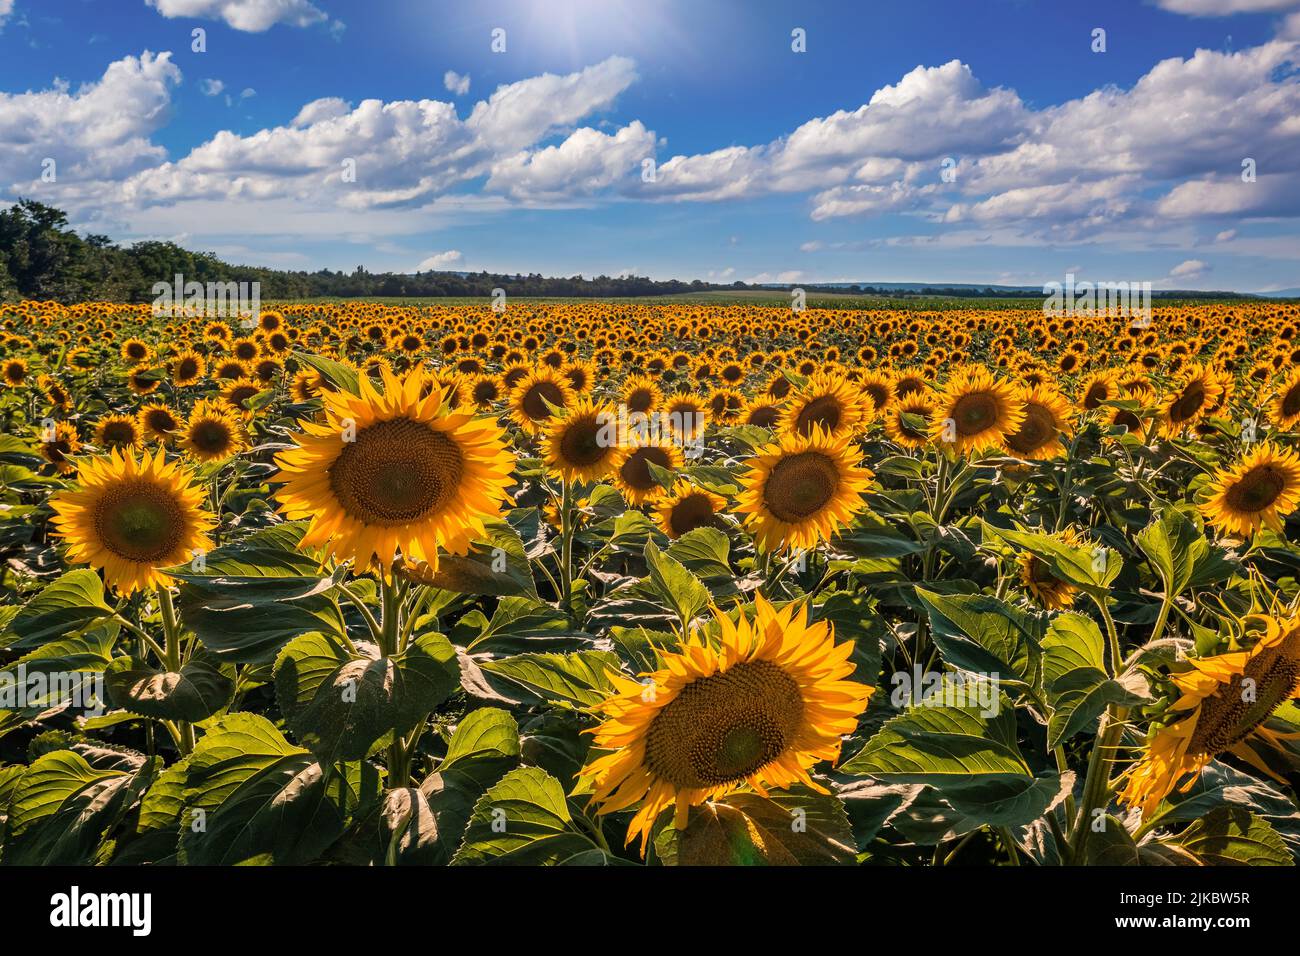 Balatonfuzfo, Hungary - Sunflower field at summertime with sunlight and blue sky with clouds near Lake Balaton. Agricultural background Stock Photo